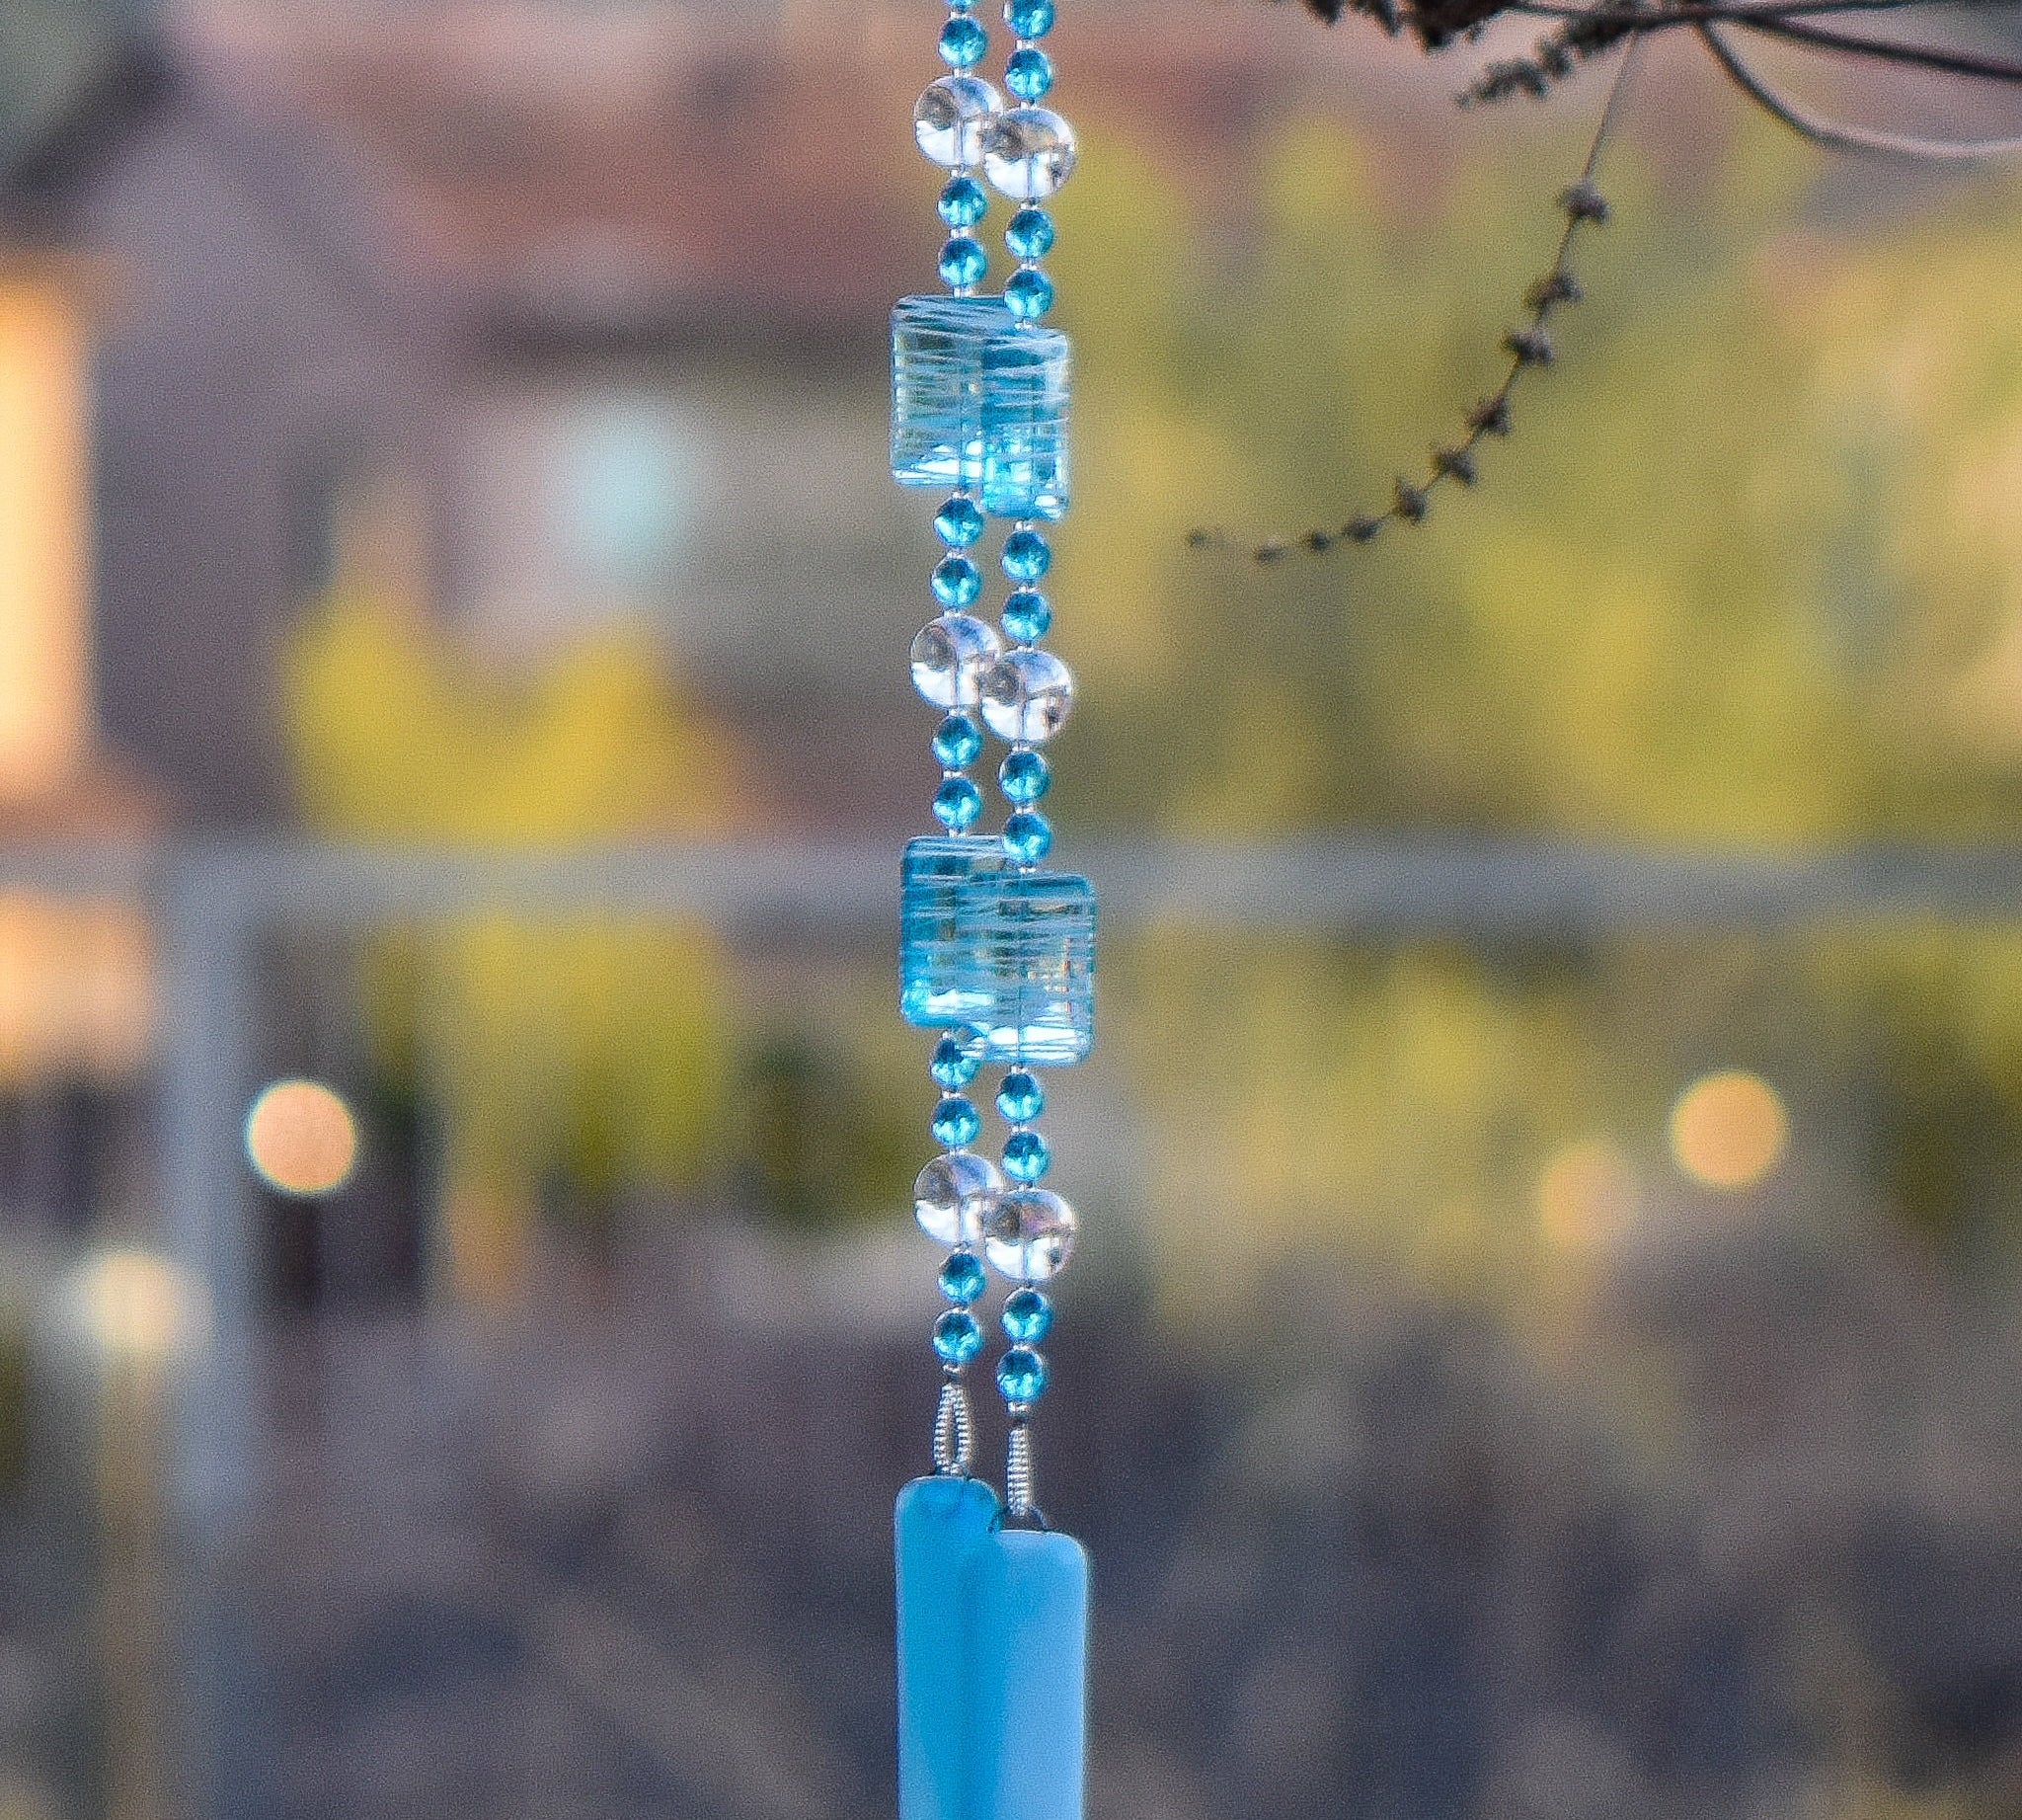 Large blue and white rectangular beads are strung with smaller turquoise blue glass beads and large clear glass beads, all anchored by two pieces of blue fused glass, hanging from tree